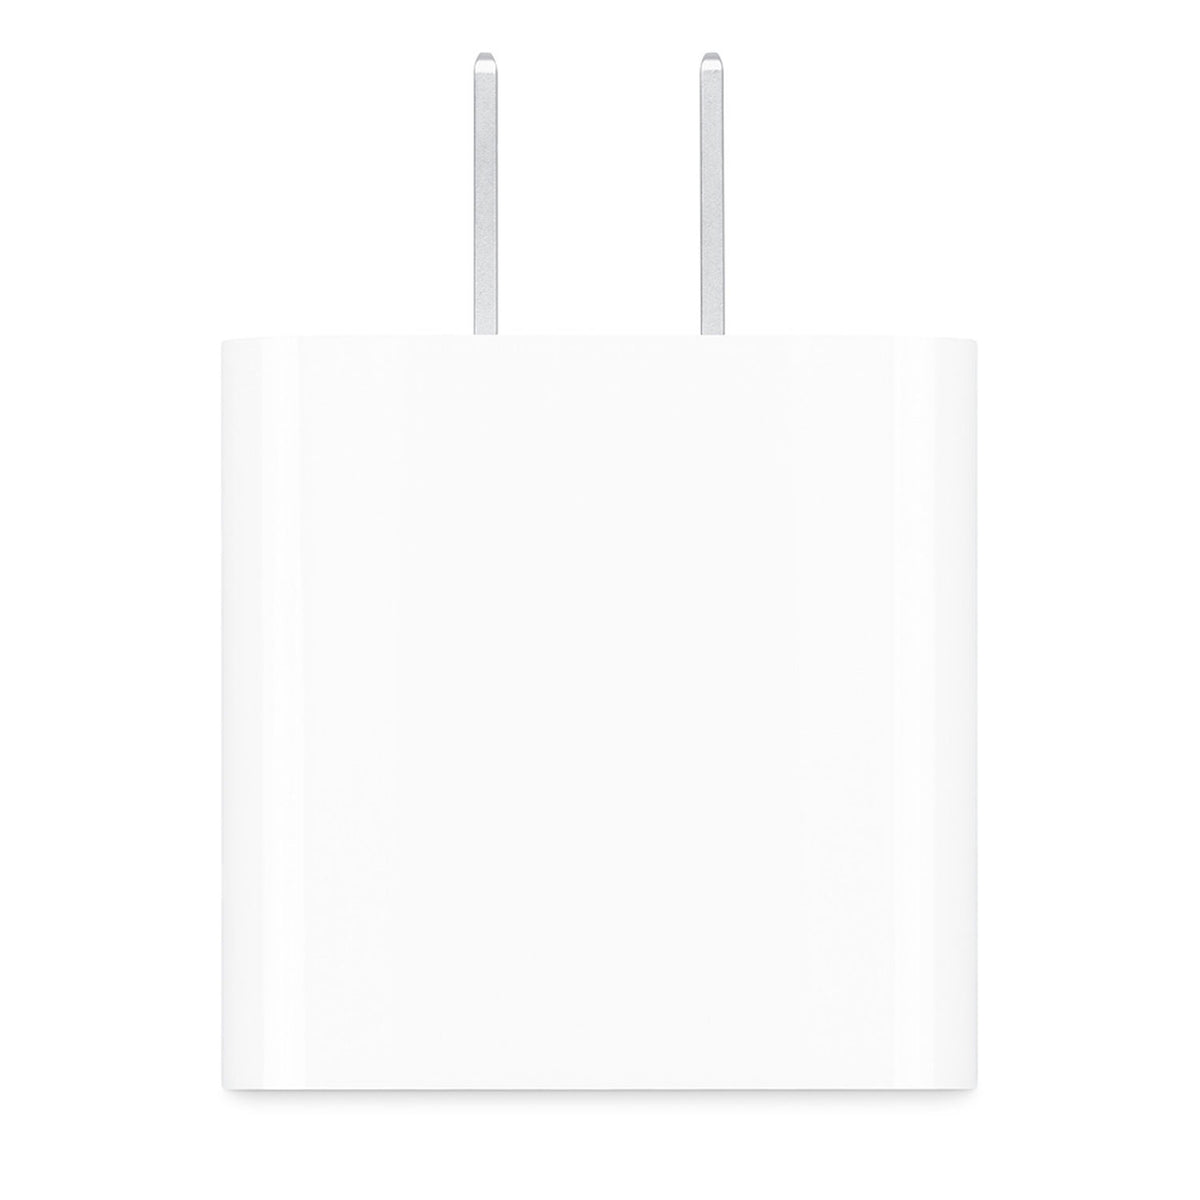 20W USB-C POWER ADAPTER FOR IPHONE- US VERSION